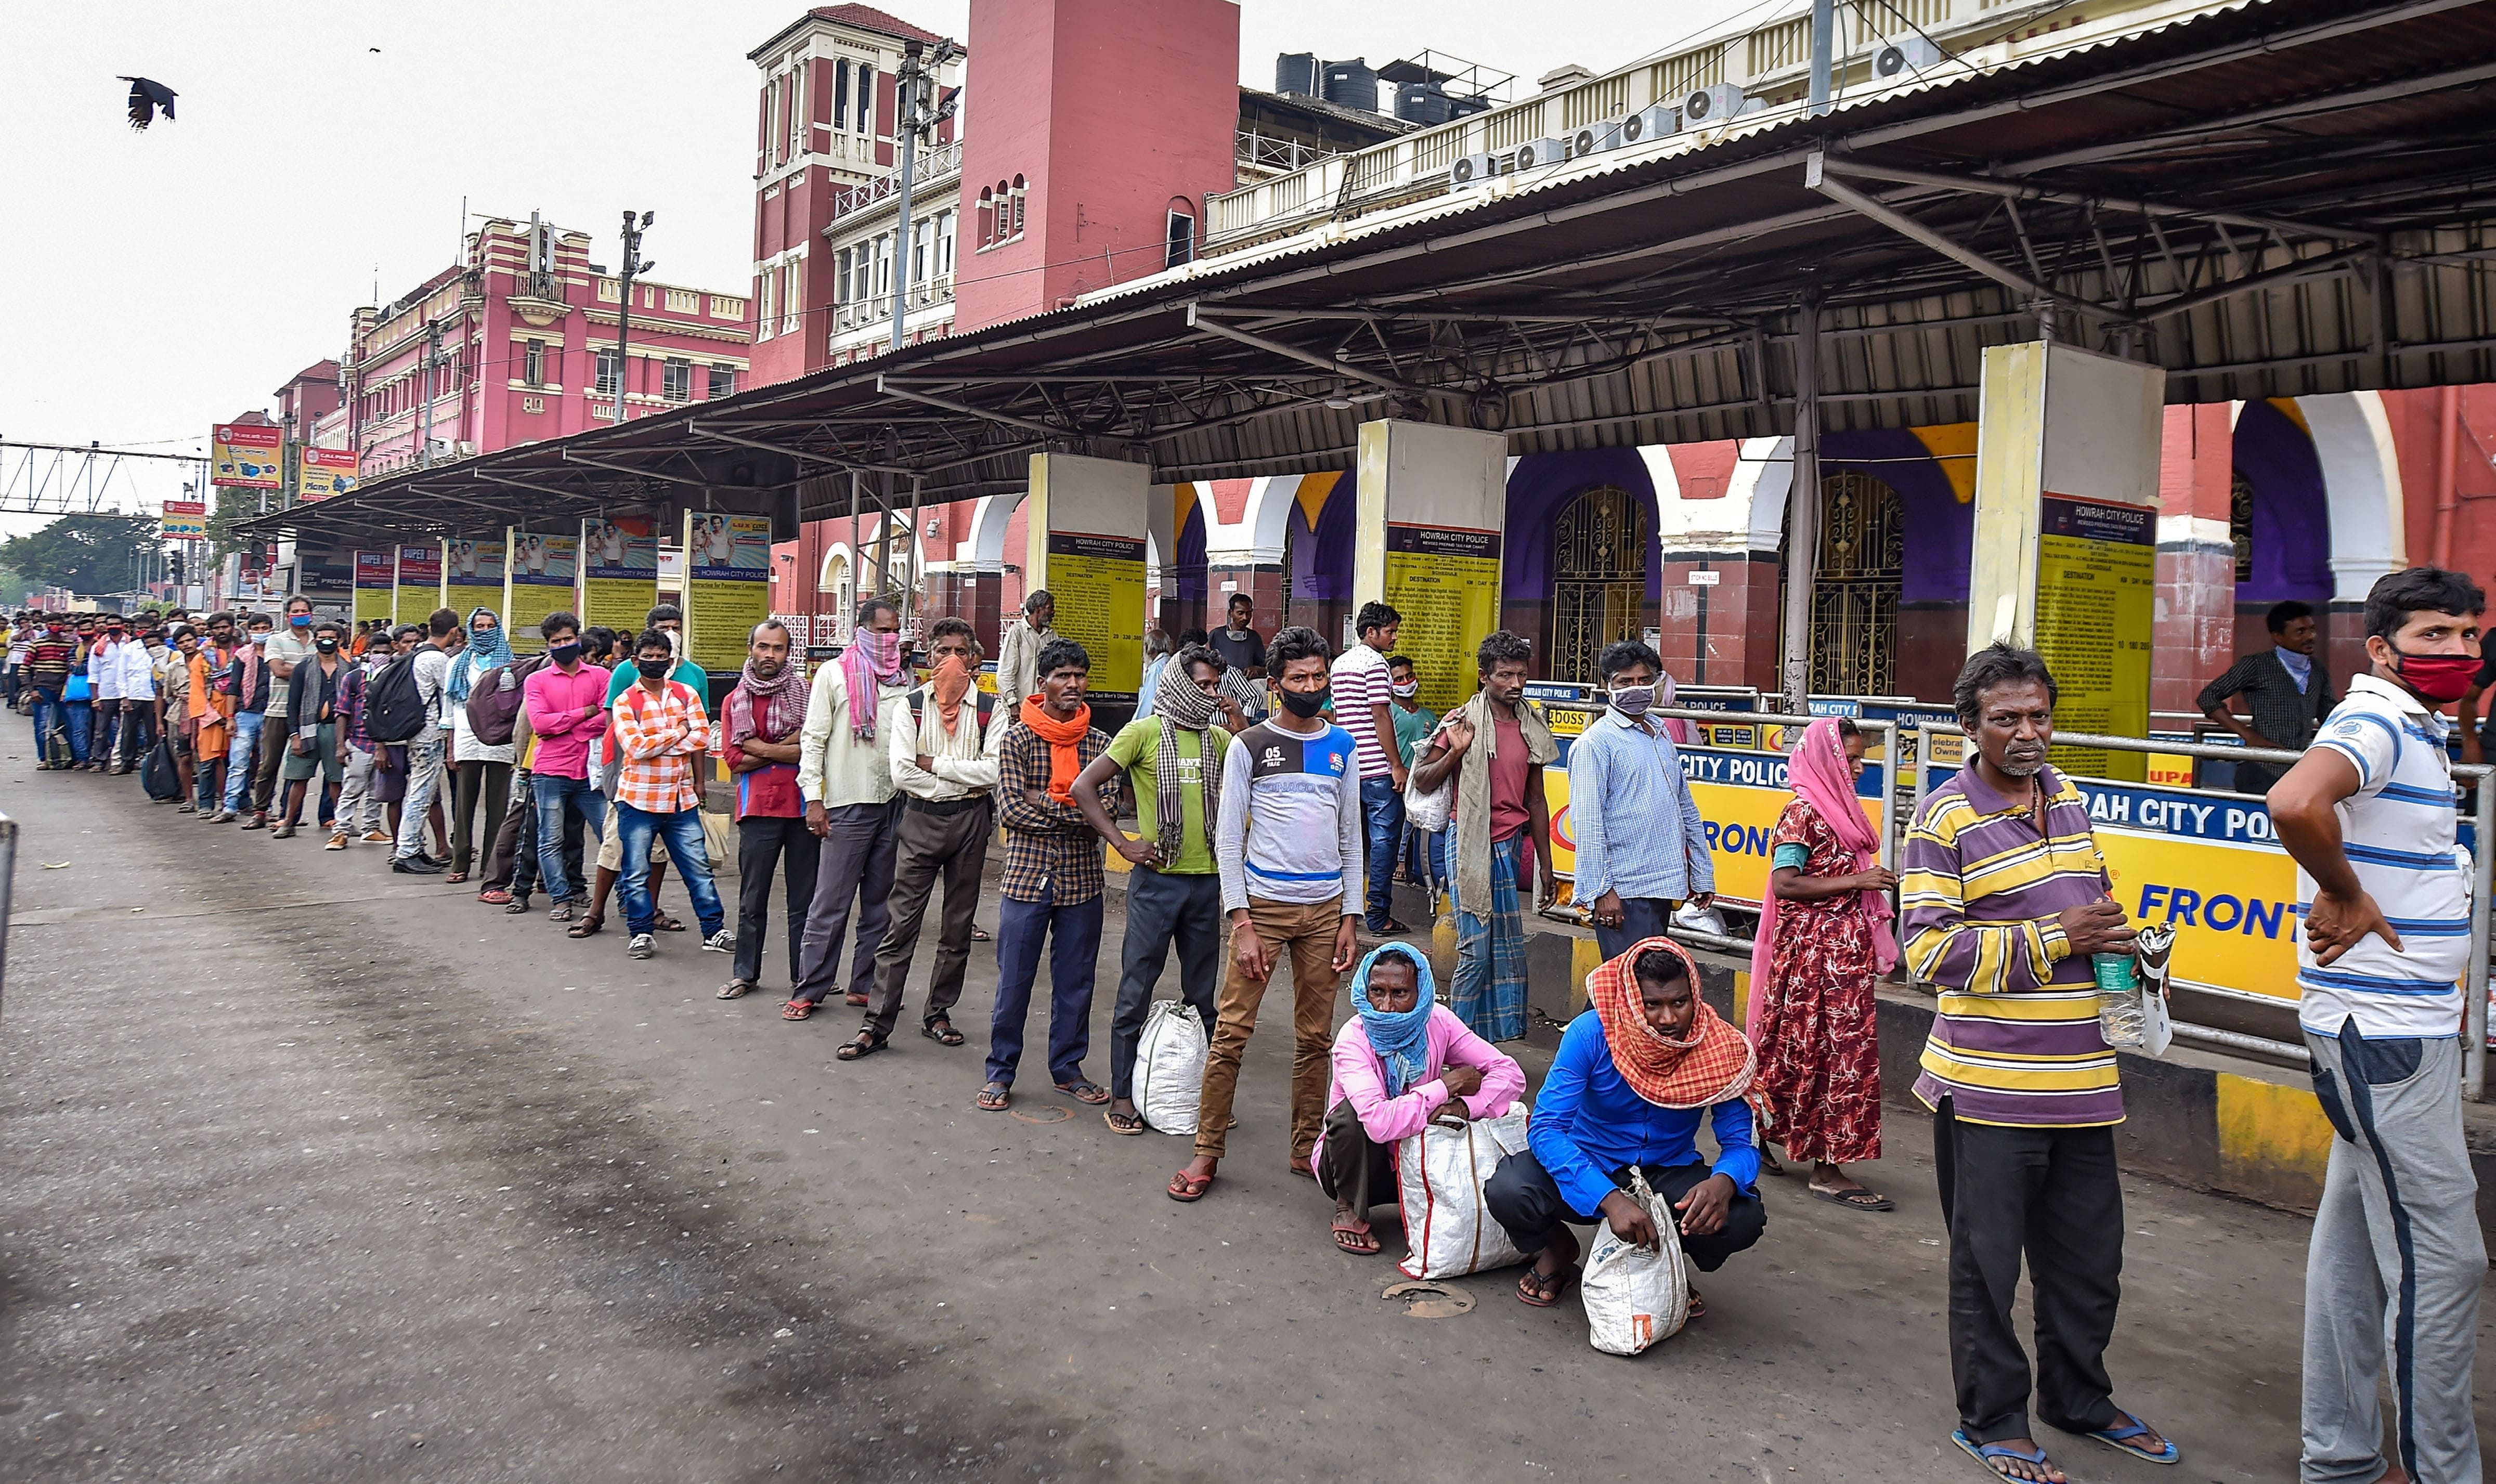  Stranded passengers at the Howrah Railway Station stand in a queue for free food, being distributed by a social organisation, during the complete lockdown imposed in the wake of coronavirus pandemic, in Kolkata. (Credit: PTI Photo)